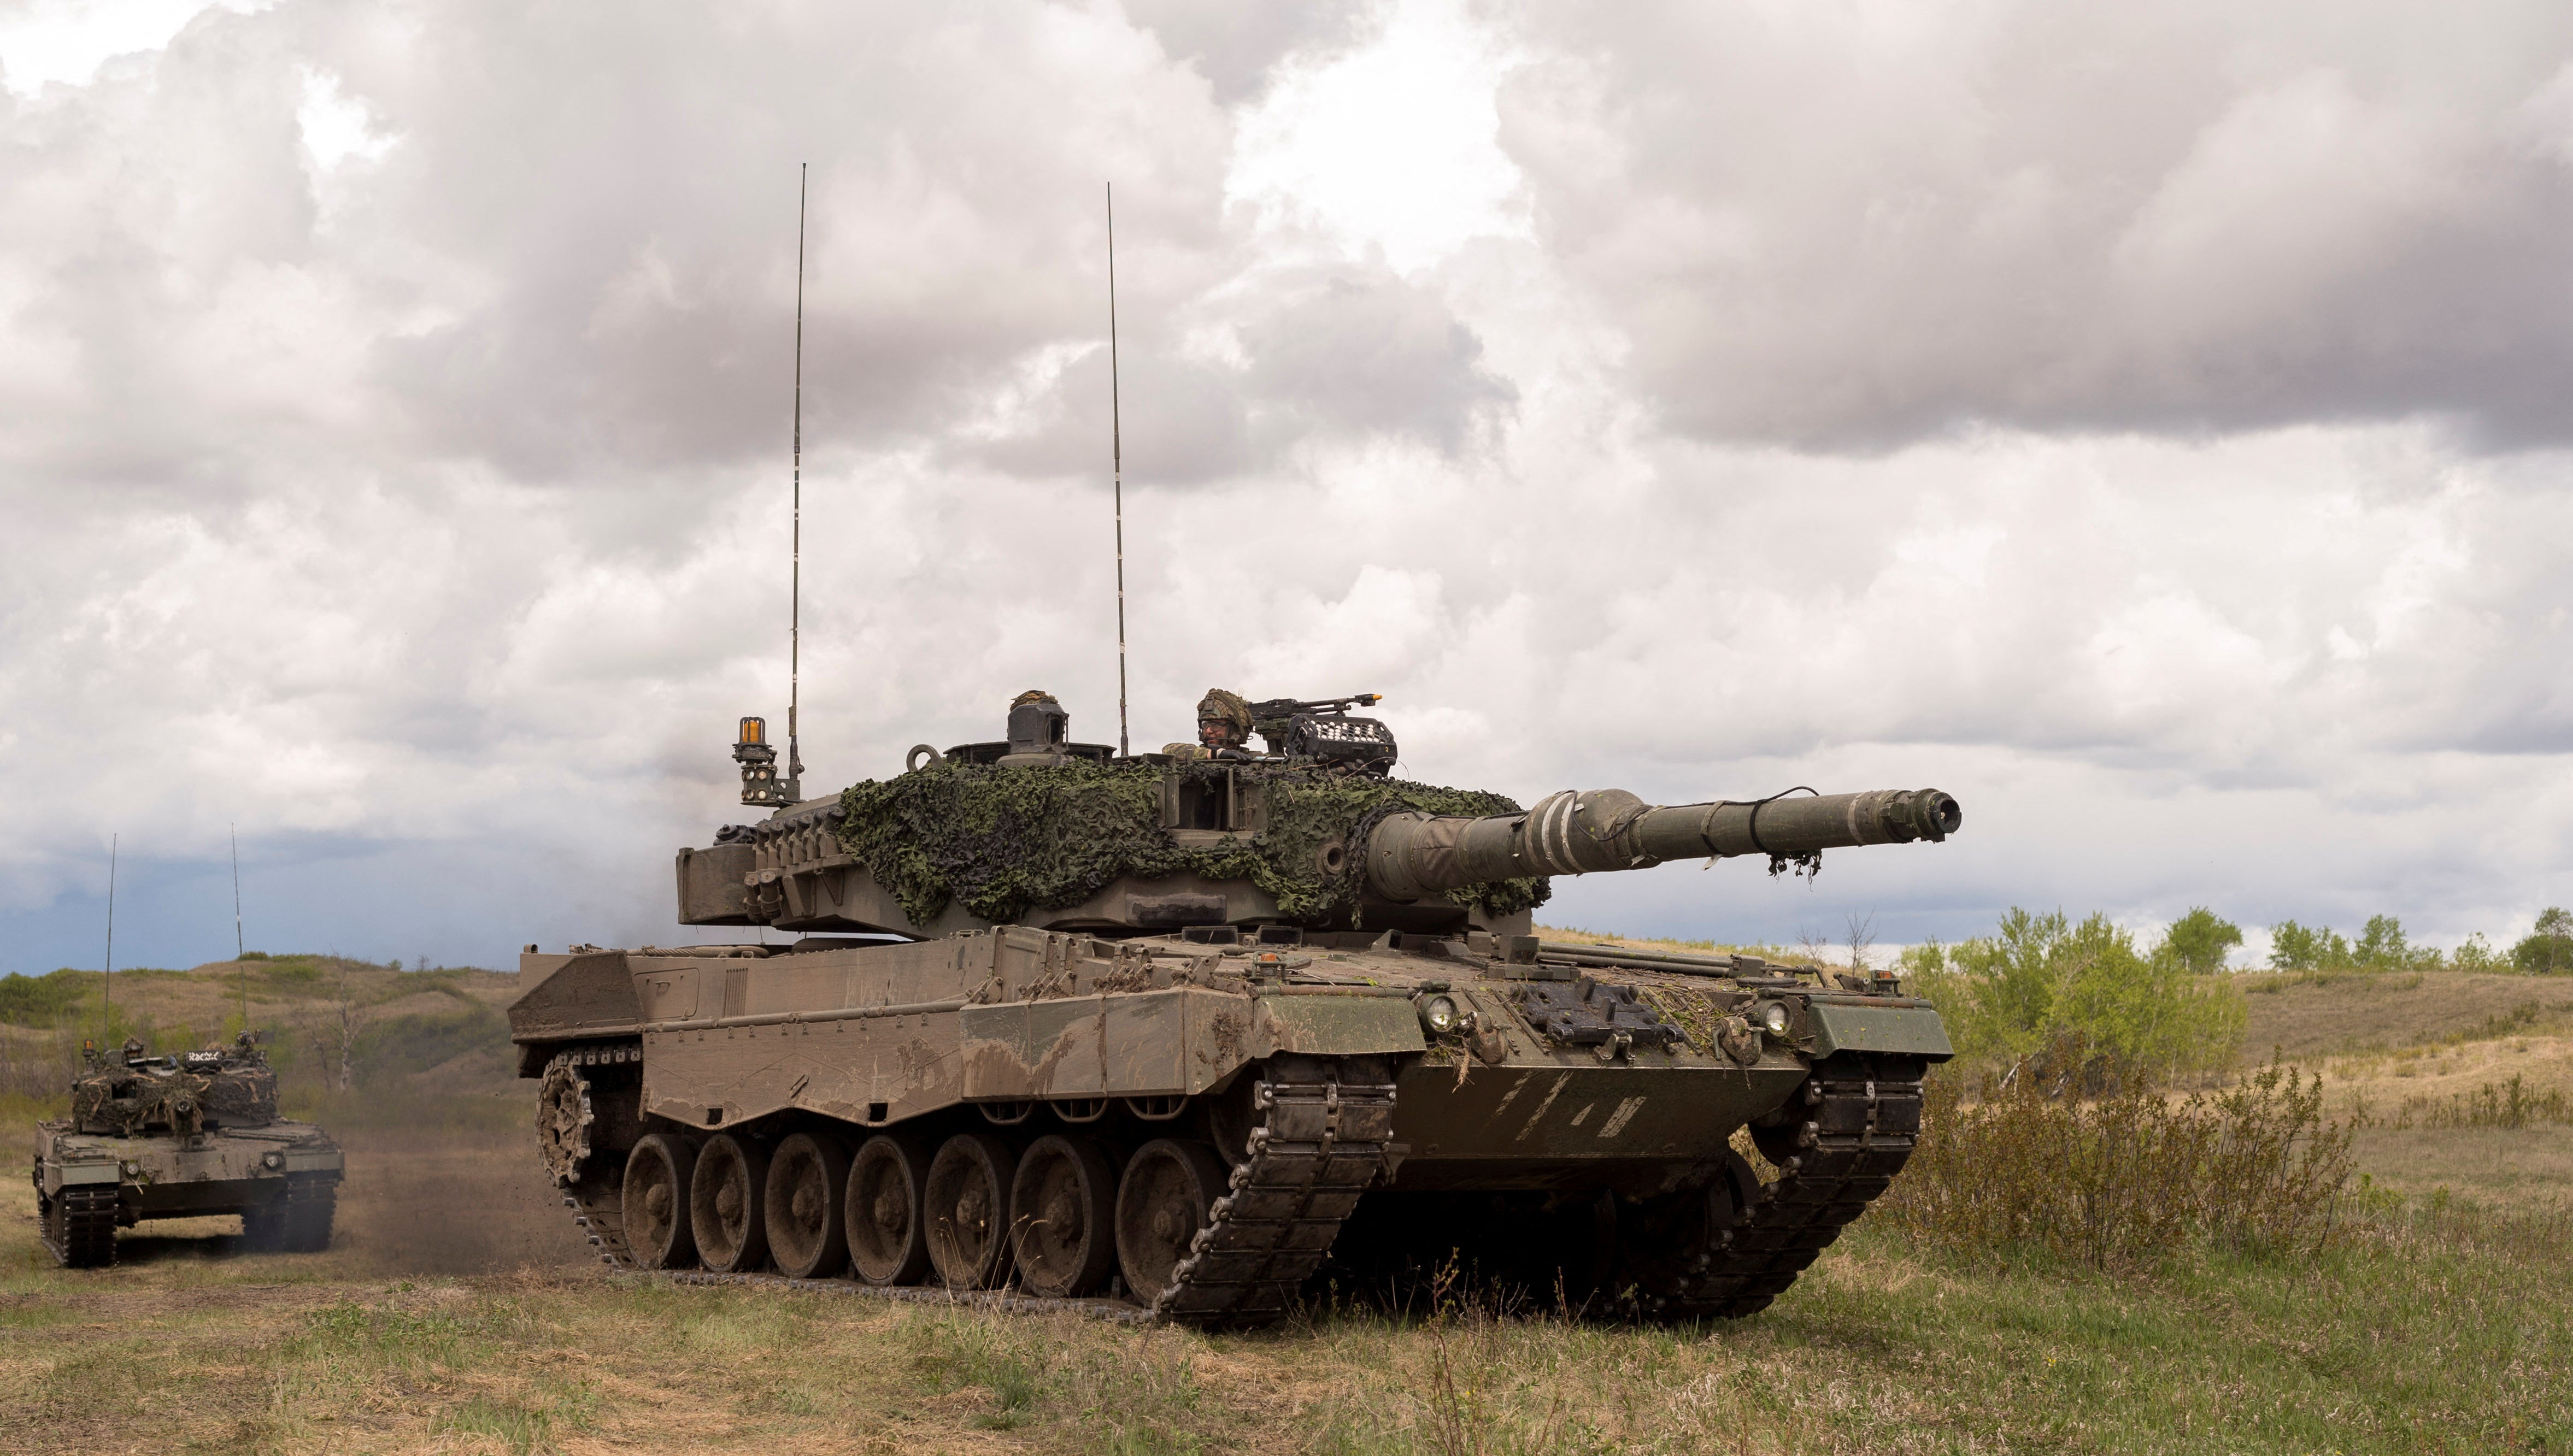 Leopard 2A4 tanks from the Royal Canadian Dragoons, C Squadron travel in the Wainwright Garrison training area